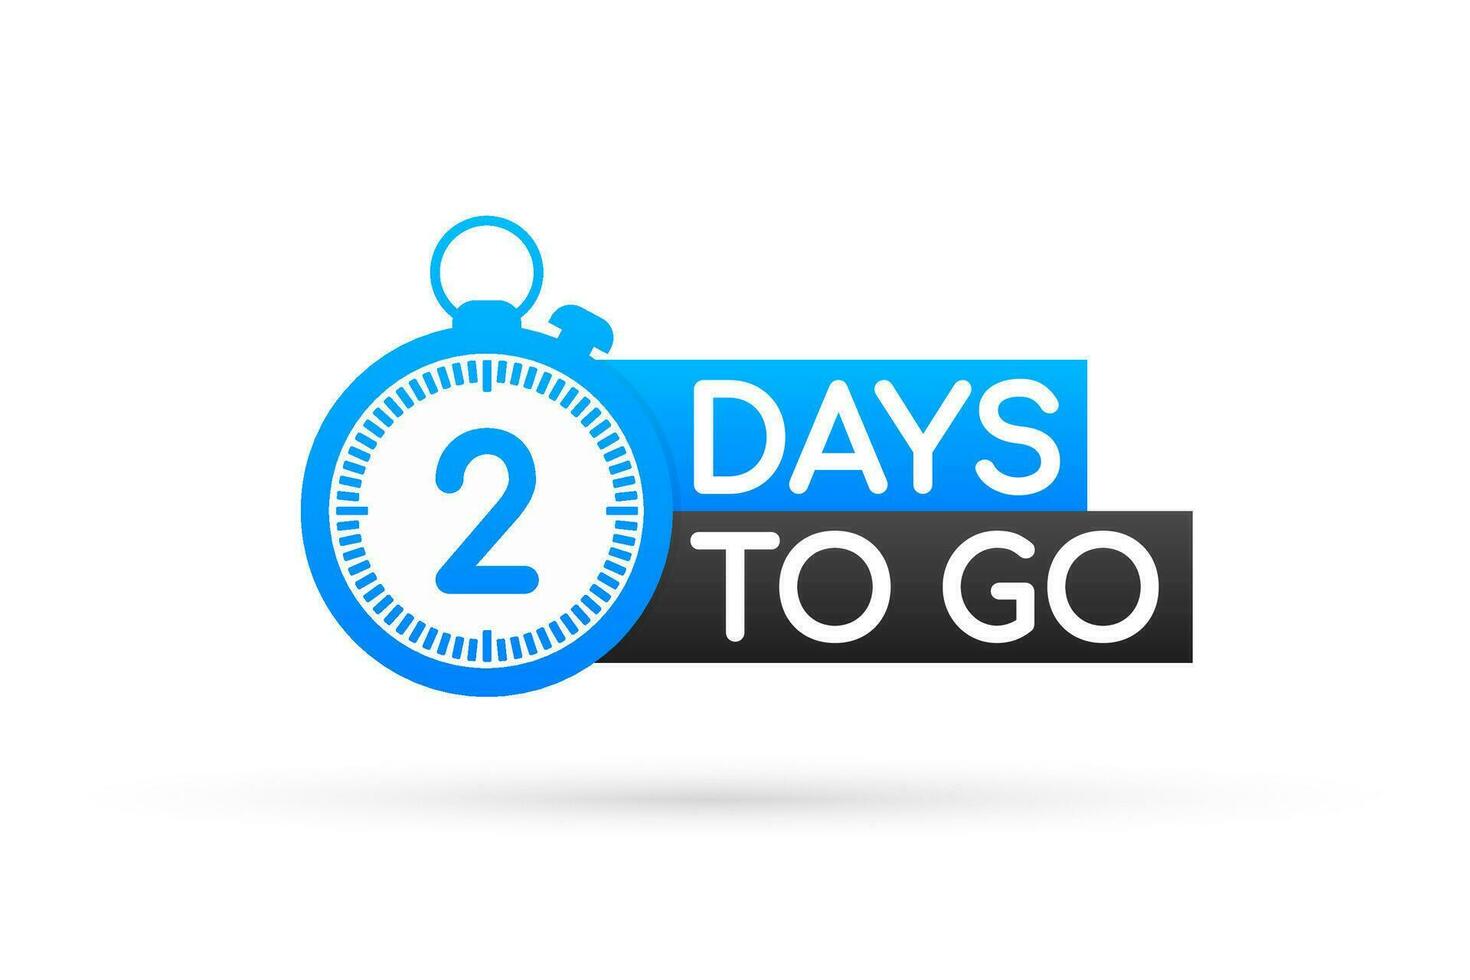 Two days to go sign. Vector stock illustration